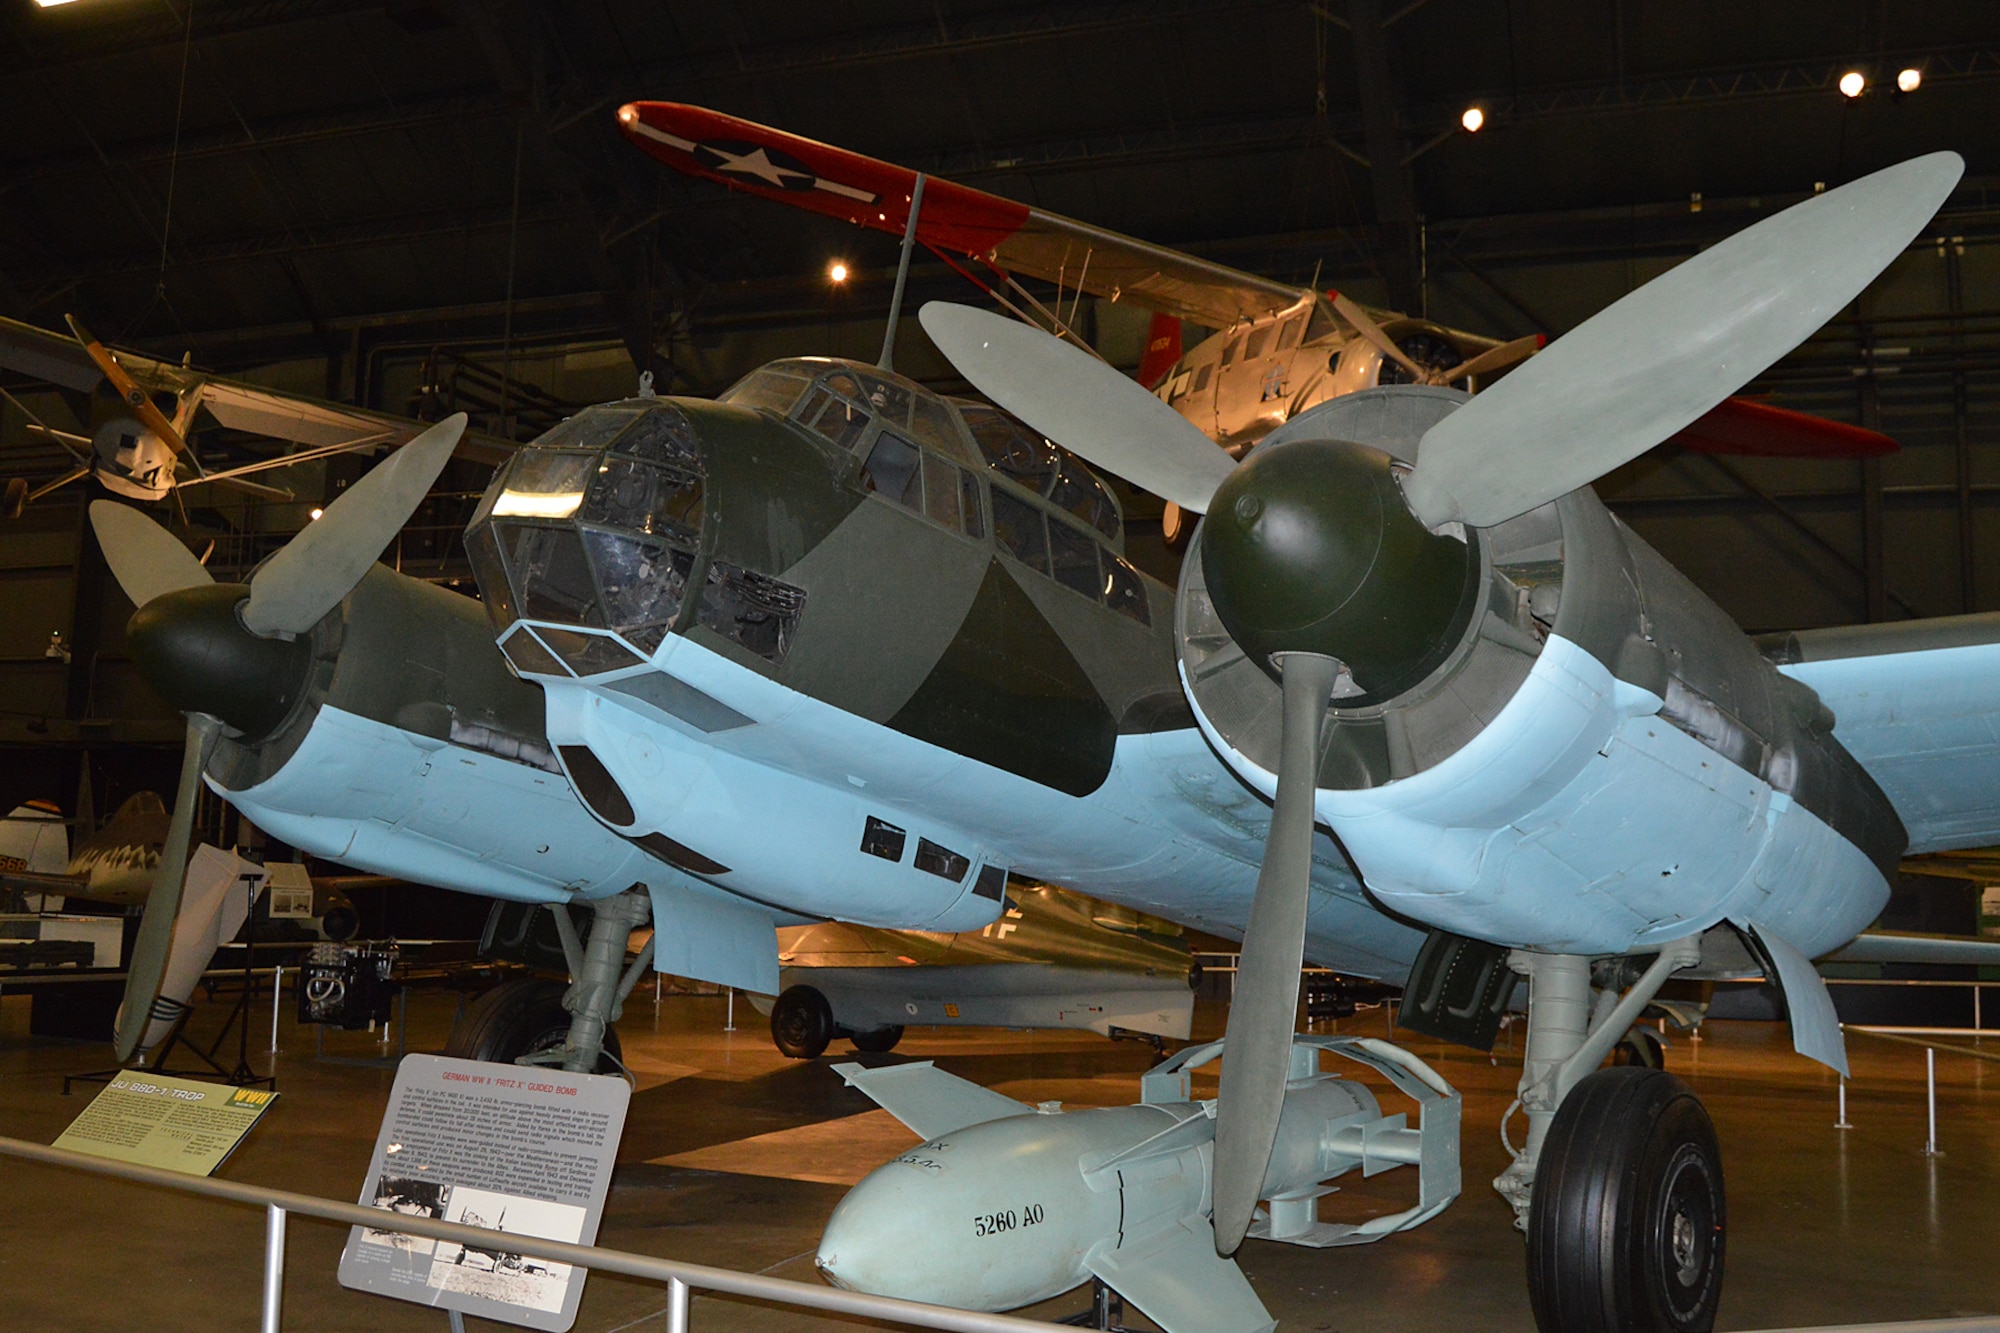 DAYTON, Ohio -- Junkers Ju 88D in the World War II Gallery at the National Museum of the United States Air Force. (U.S. Air Force photo)
